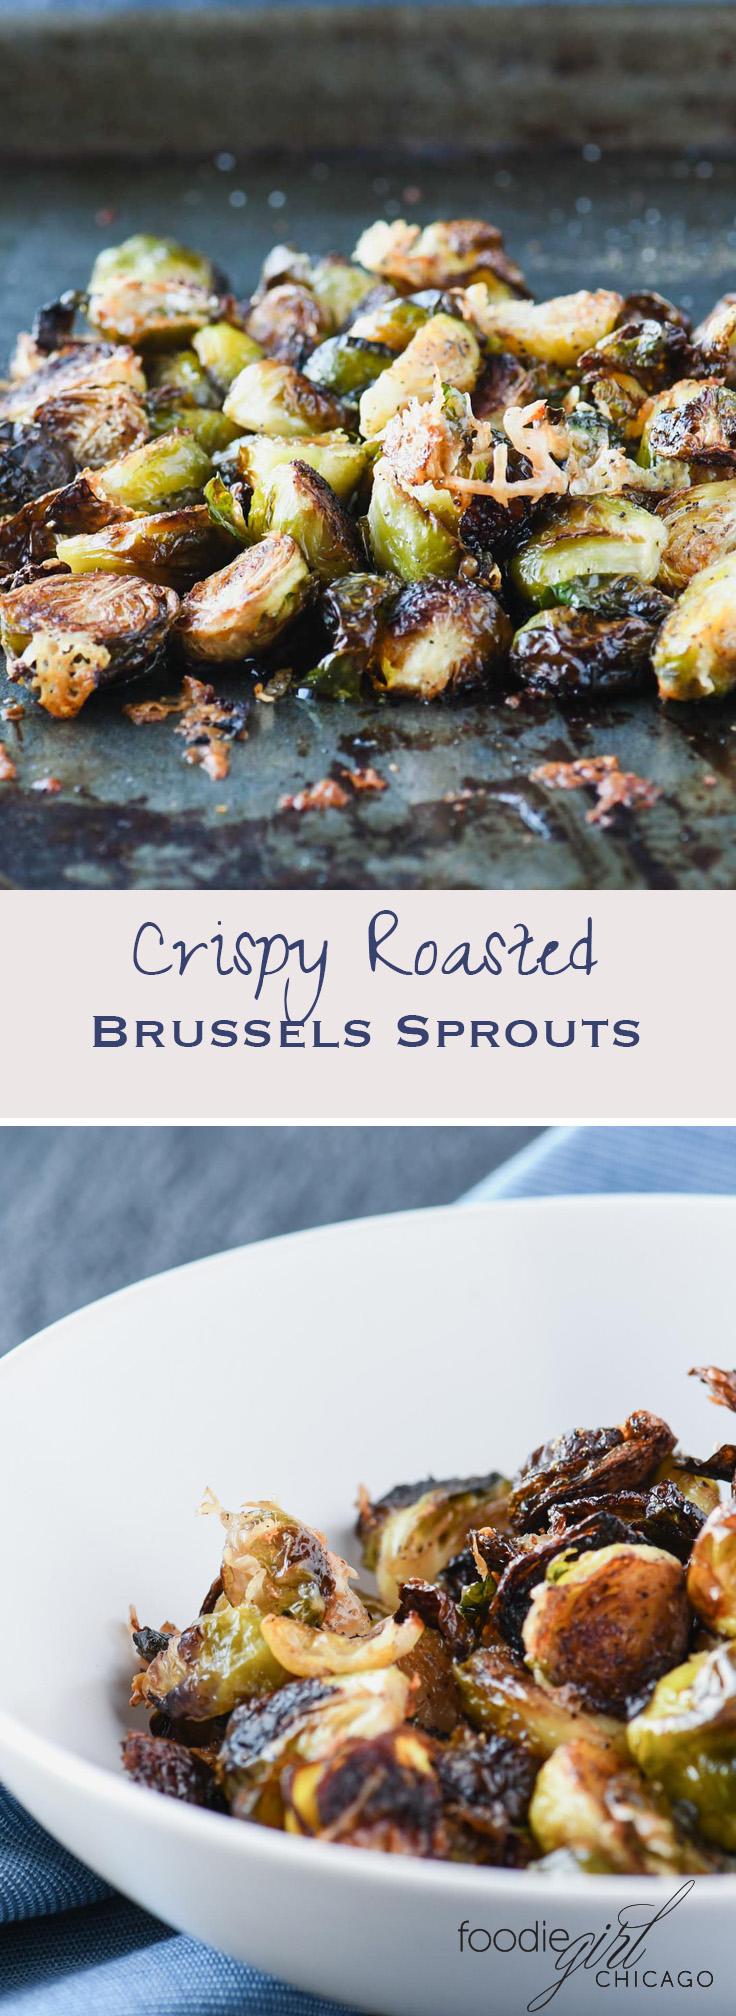 These crispy roasted brussels sprouts topped with parmesan and pomegranate simple syrup will give new meaning to the words side dish! 